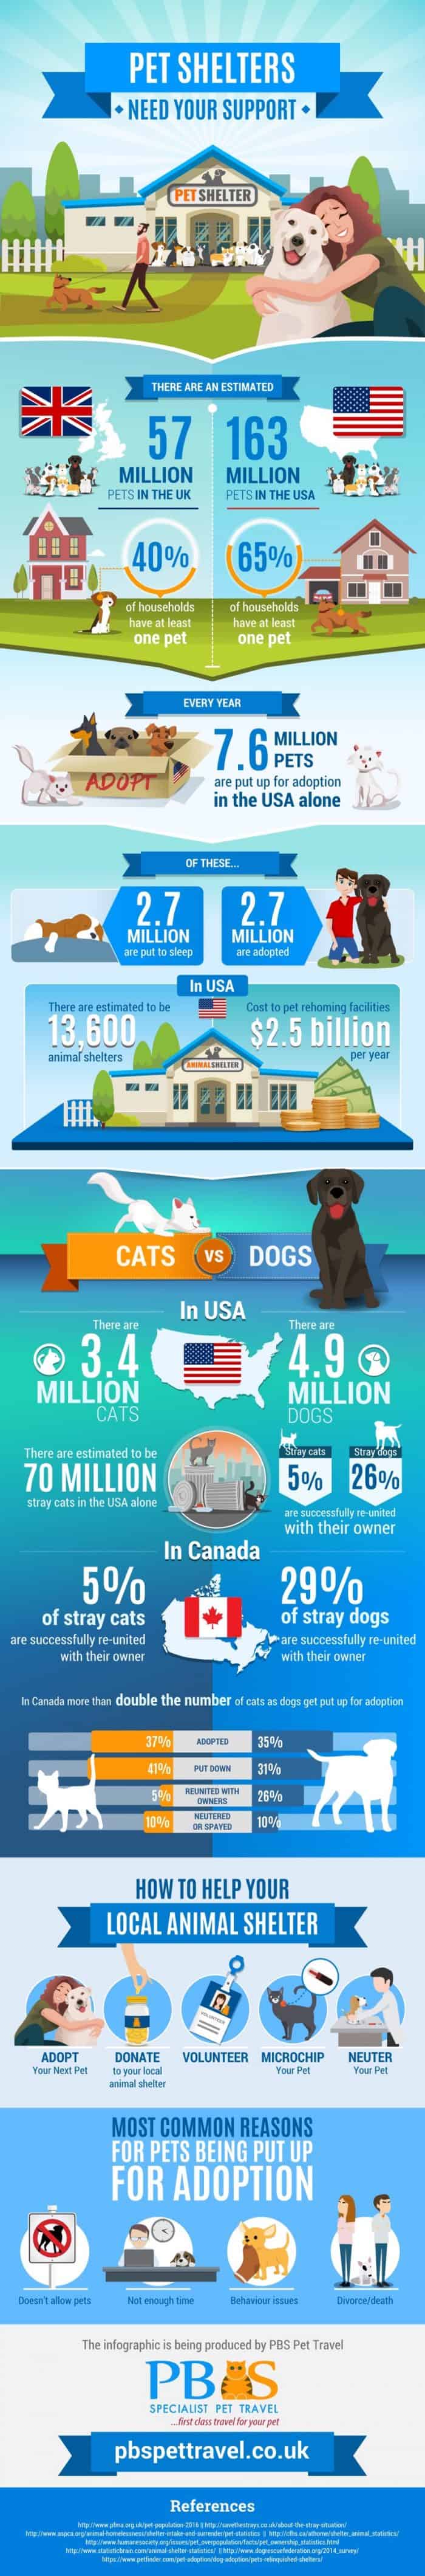 infographic describes How to Help Animal Shelters, cost of pet shelters, why to volunteer at a shelter, and how many stray animals are in the U.S. and UK